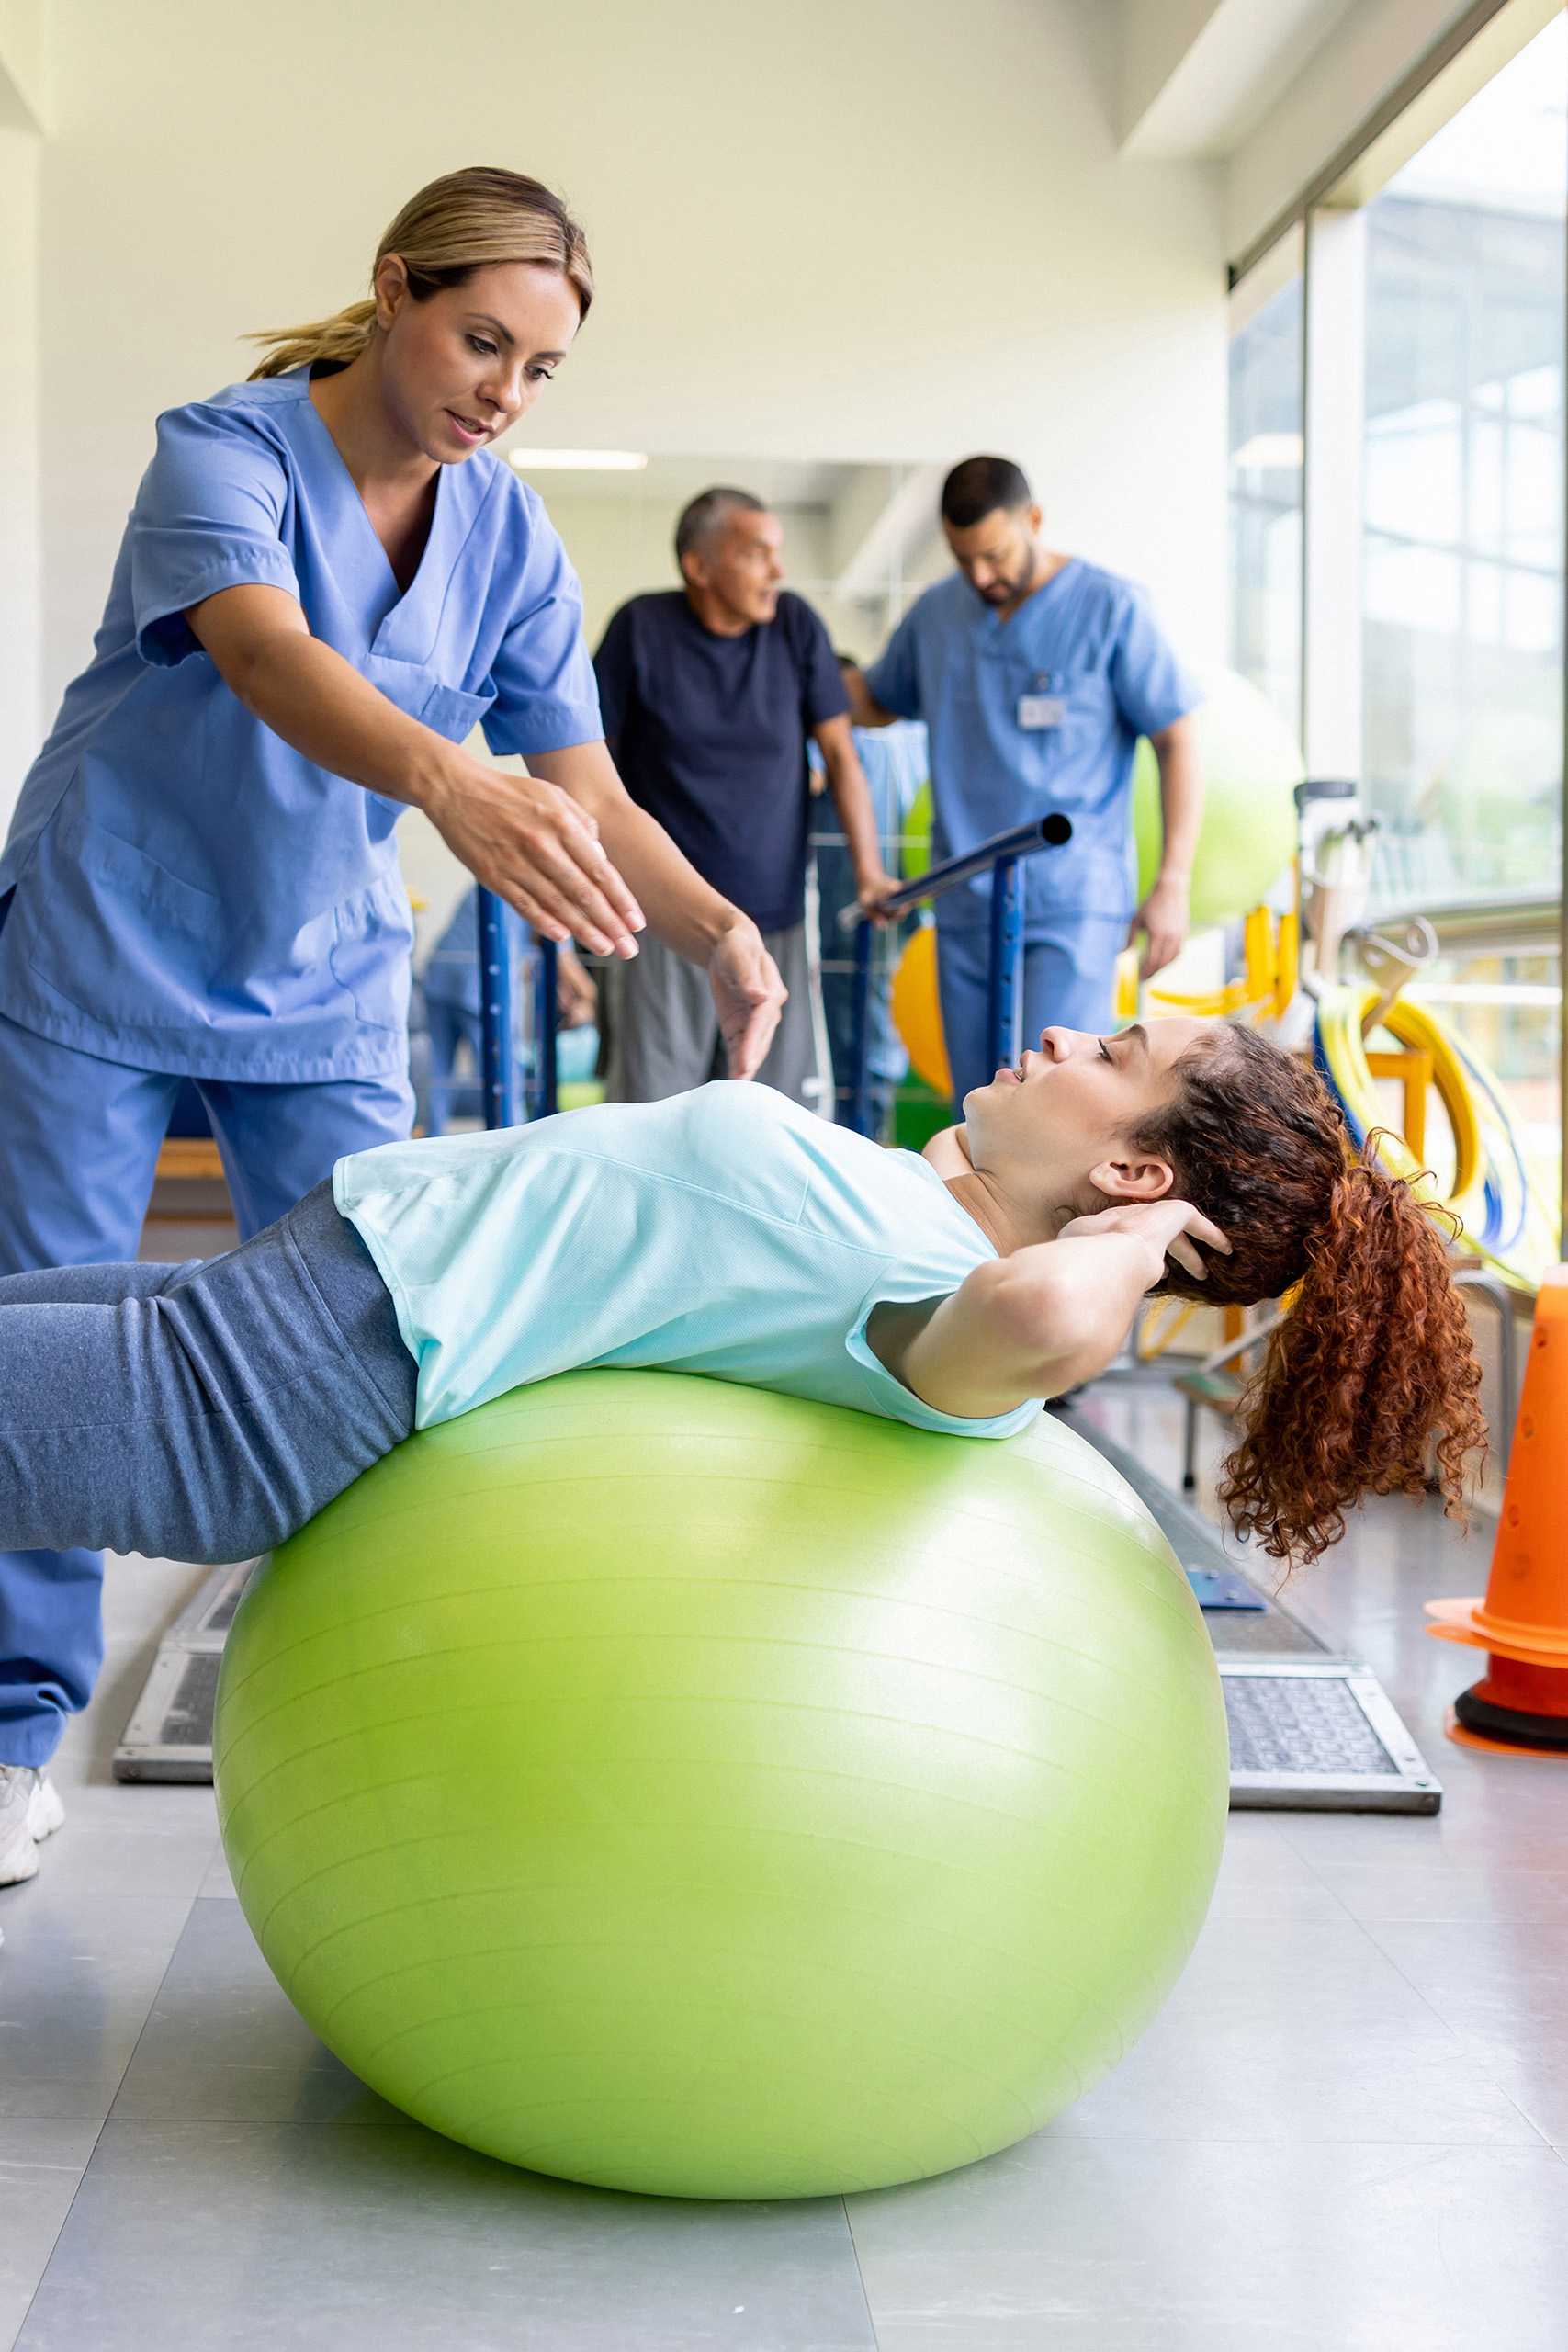 Spring Physical Therapy Patient Rehabilitation